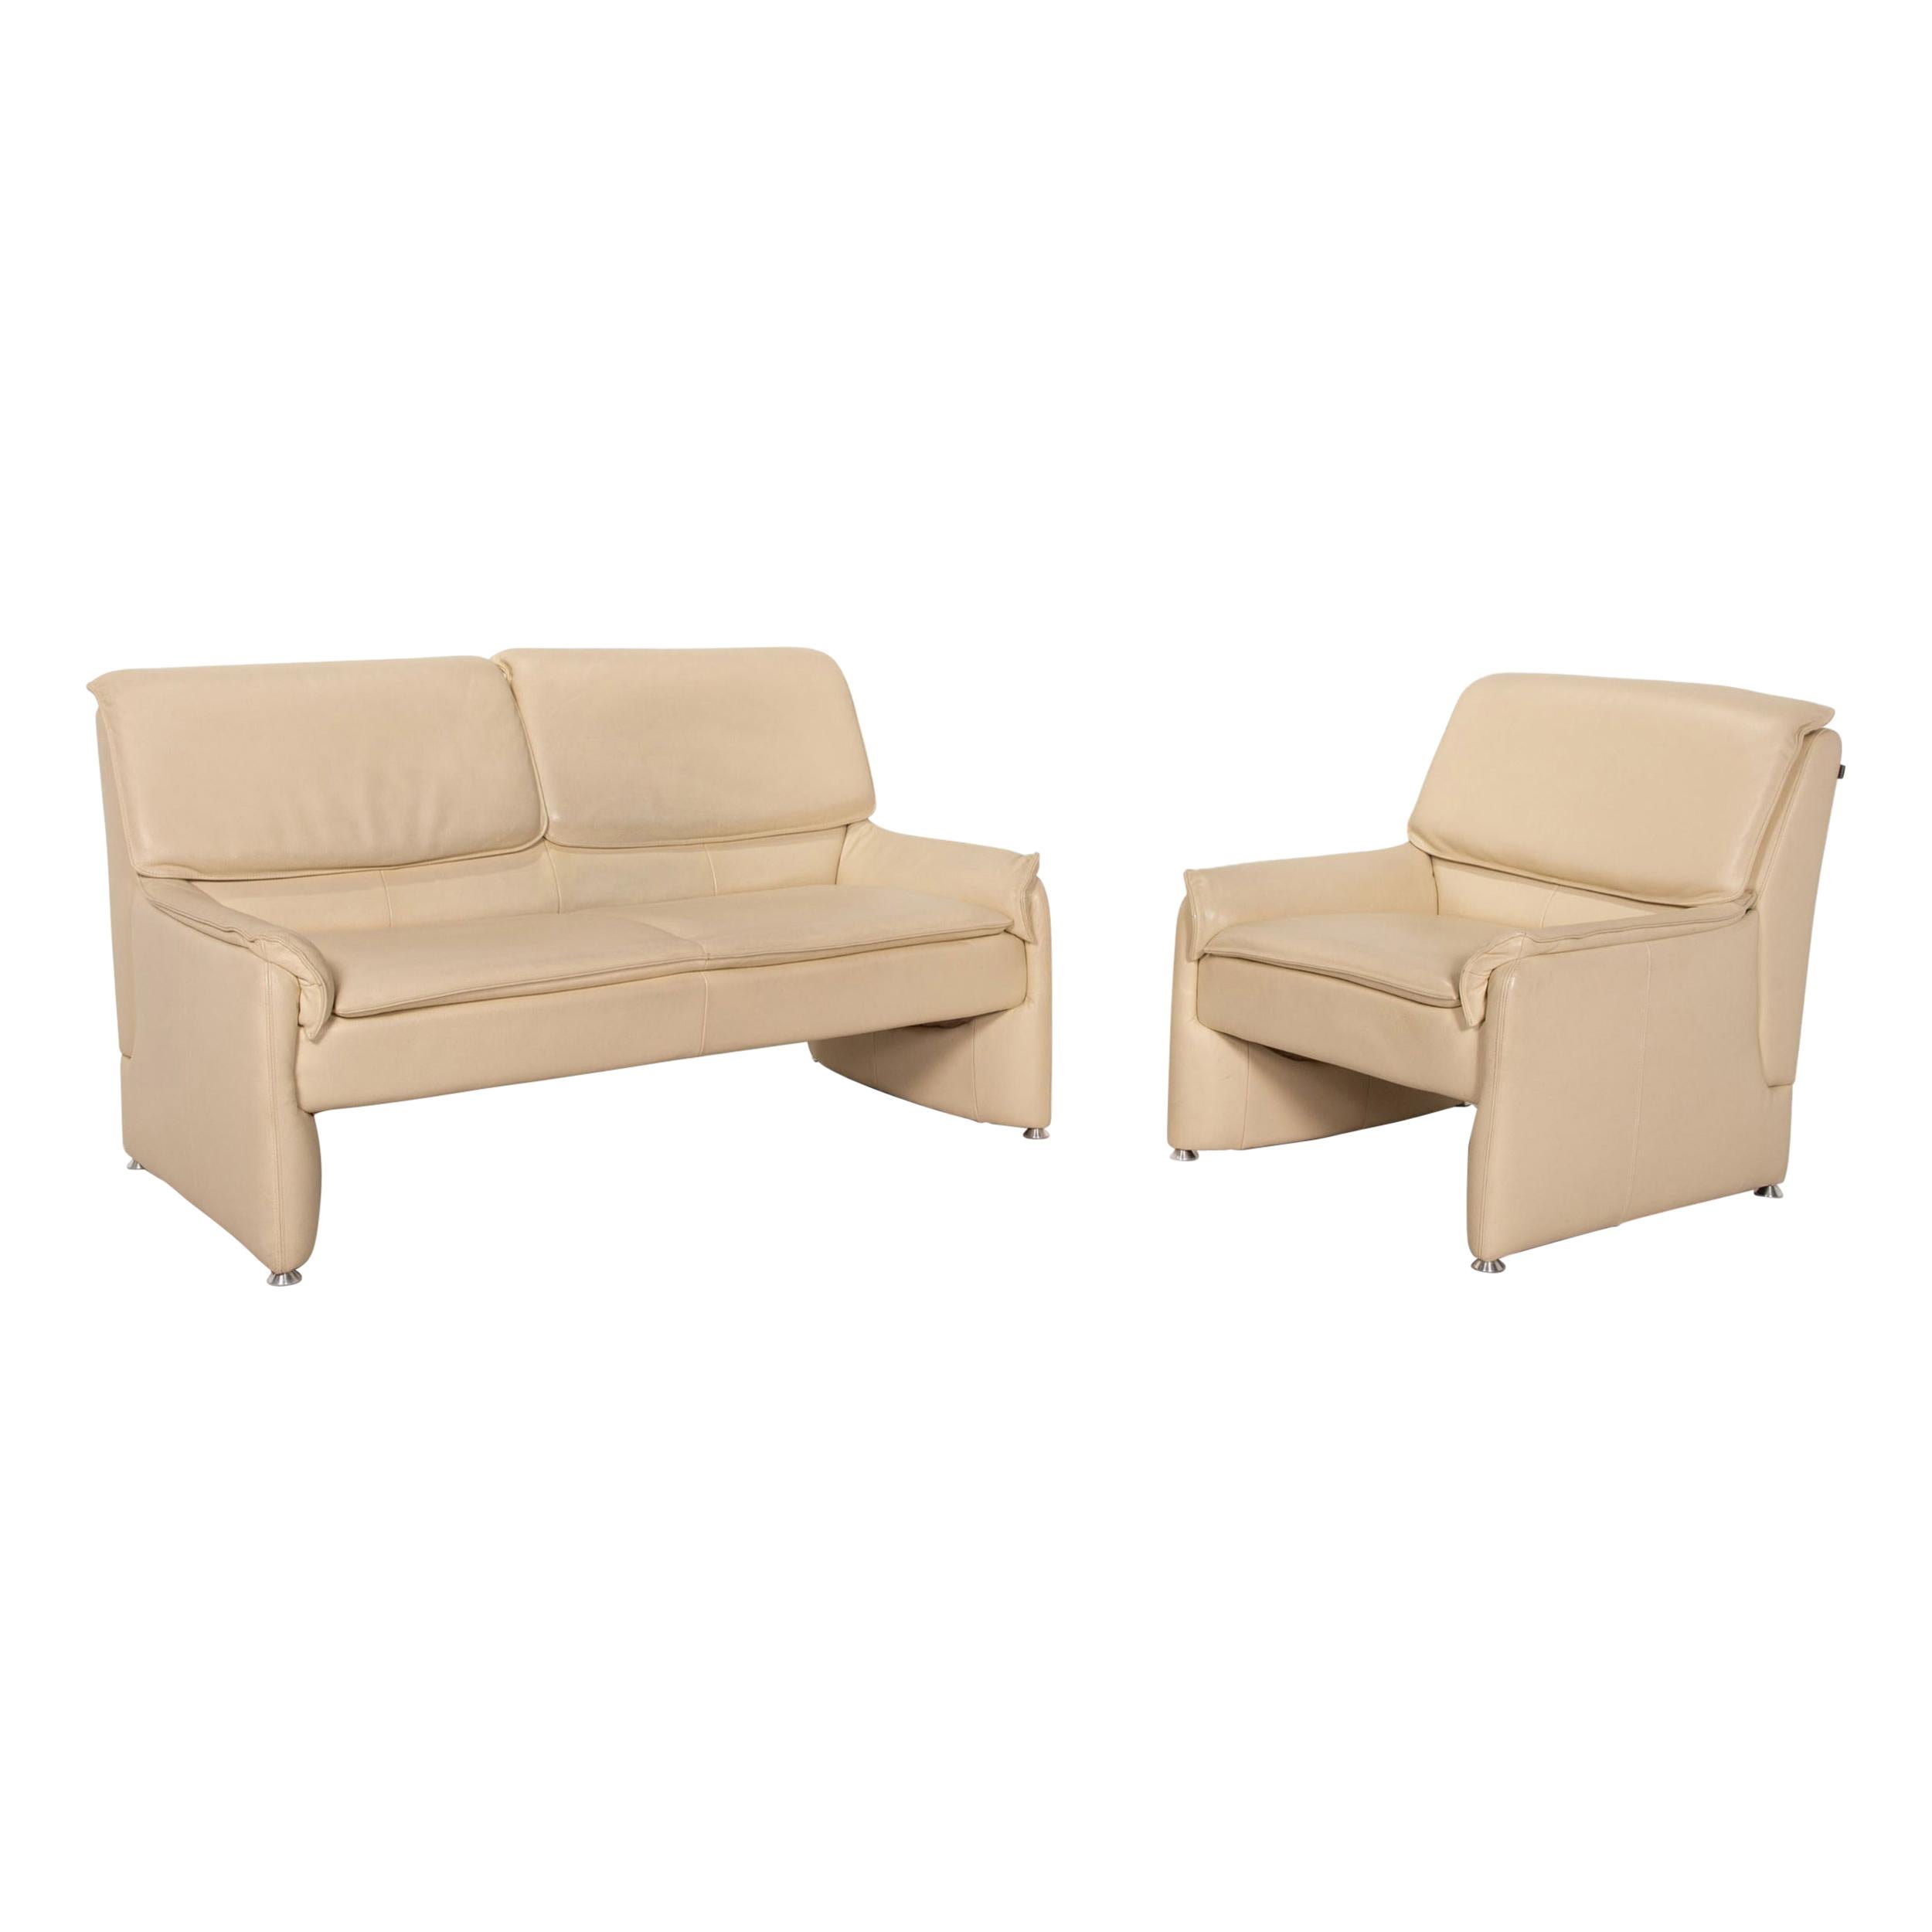 Laauser Leather Sofa Set Cream 1x Two-Seater 1x Armchair For Sale